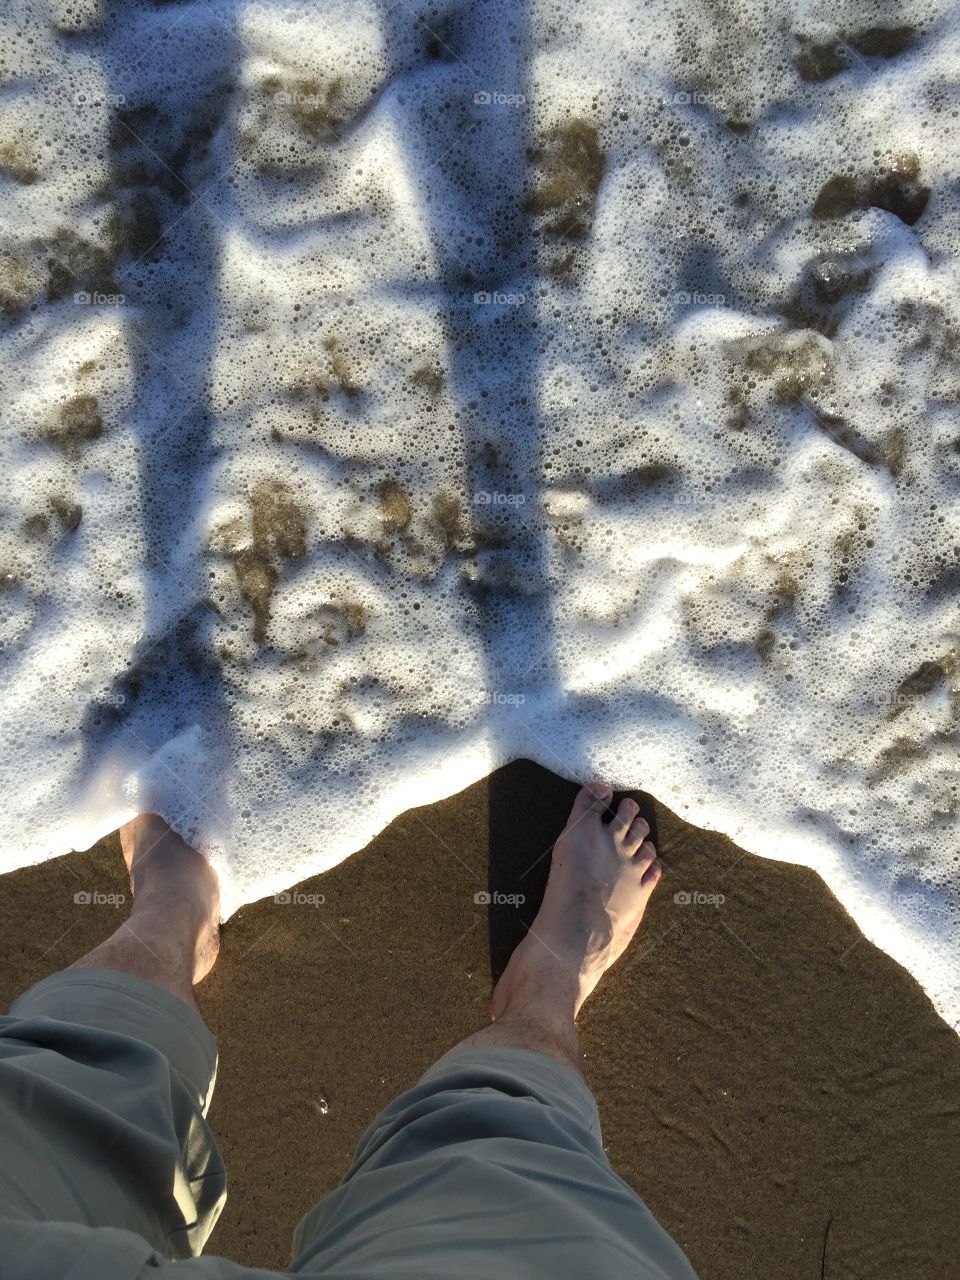 Bare feet in the Pacific Ocean for the first time. Malibu, California. 